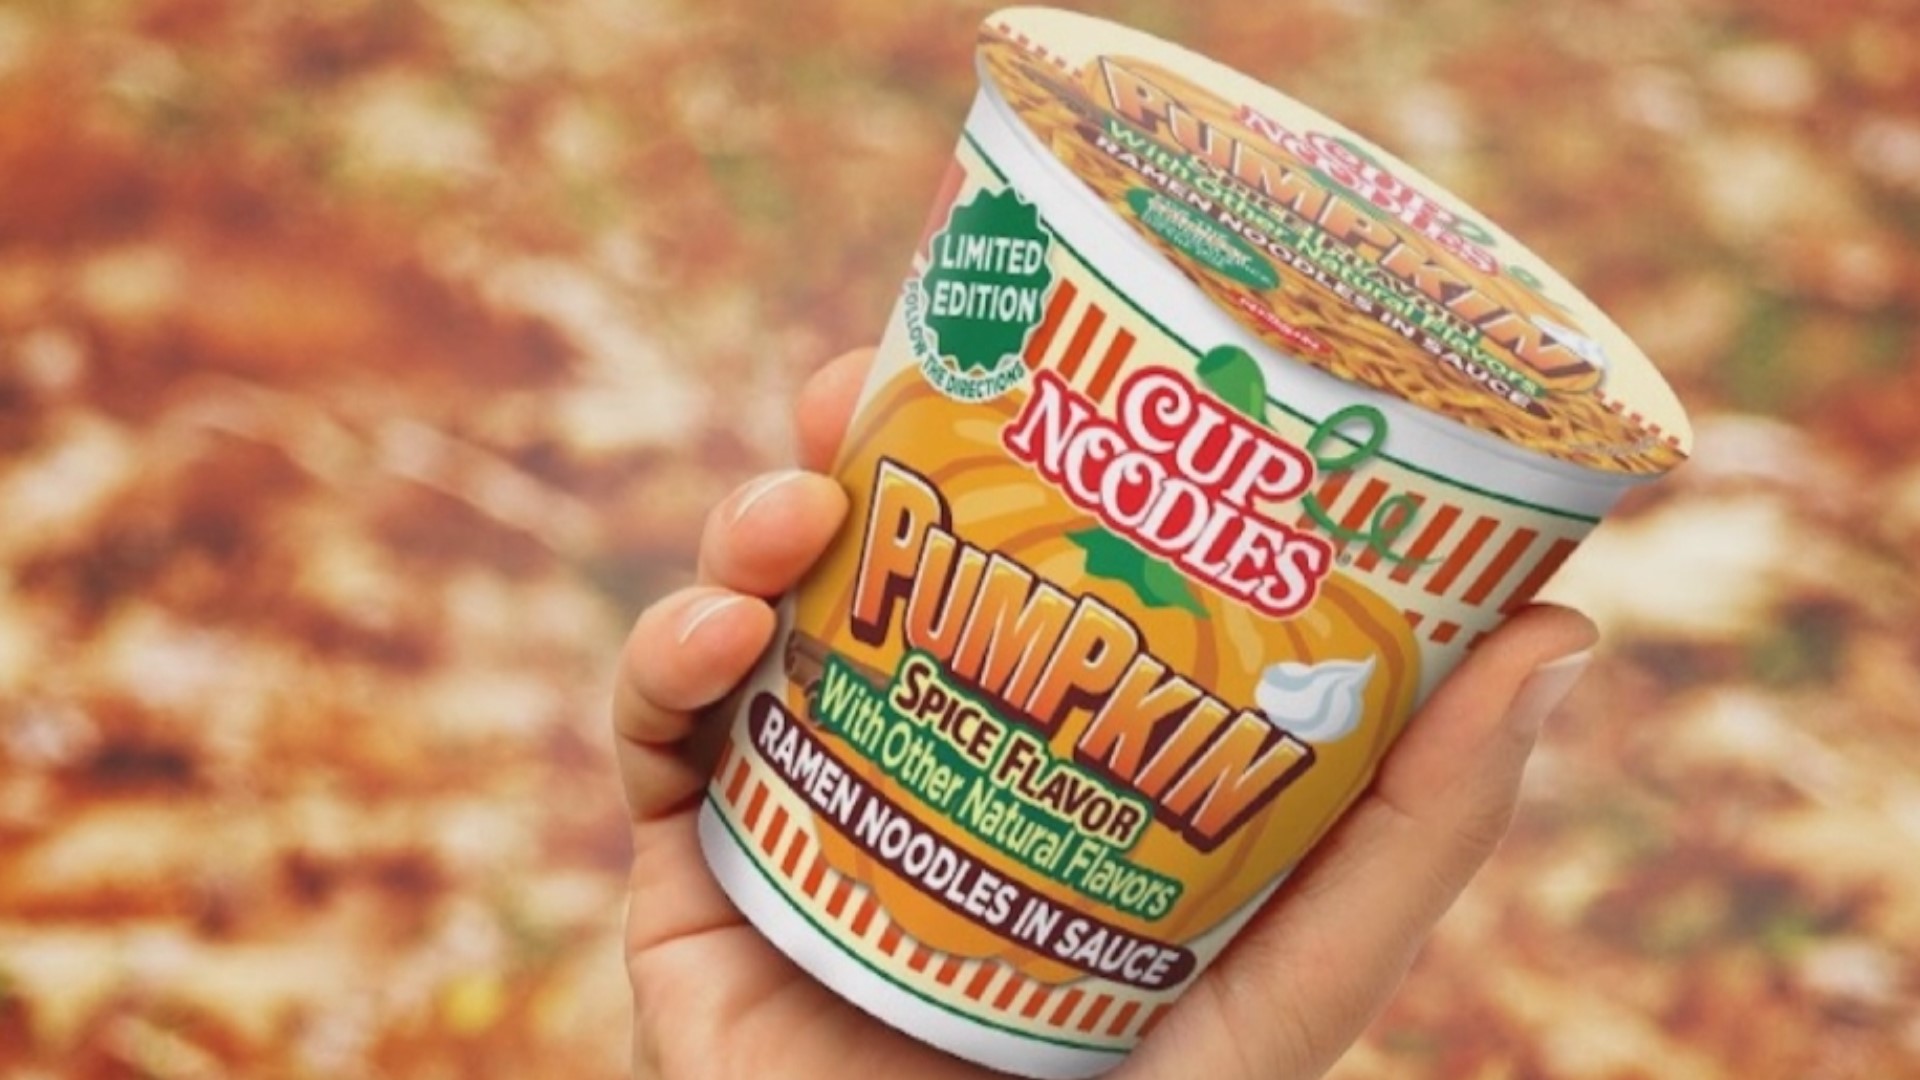 Pumpkin spice season has returned, and with it, Cup Noodles limited edition pumpkin spice flavor ramen.